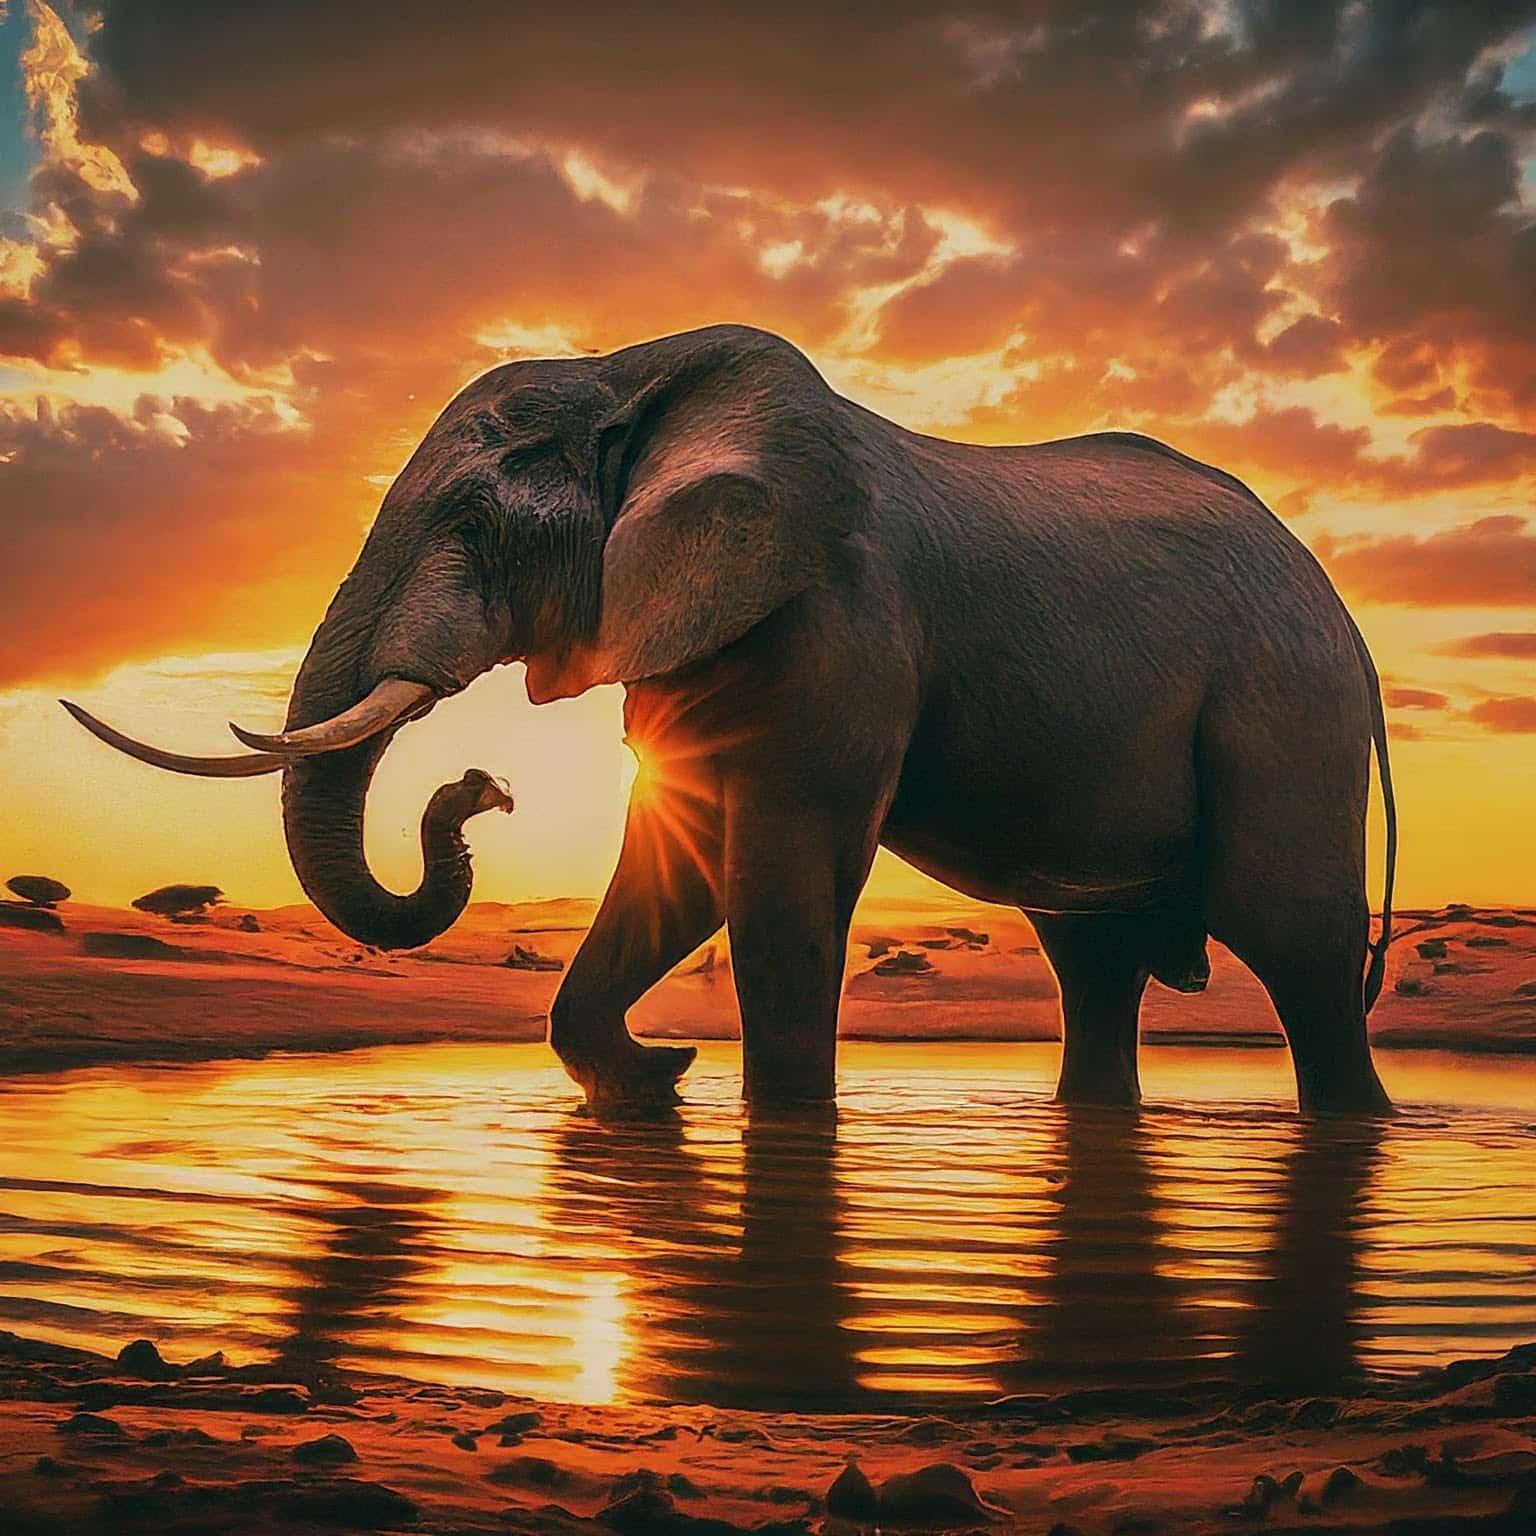 Gemini generated image of an elephant standing in a small watering hole with the sunset behind them.